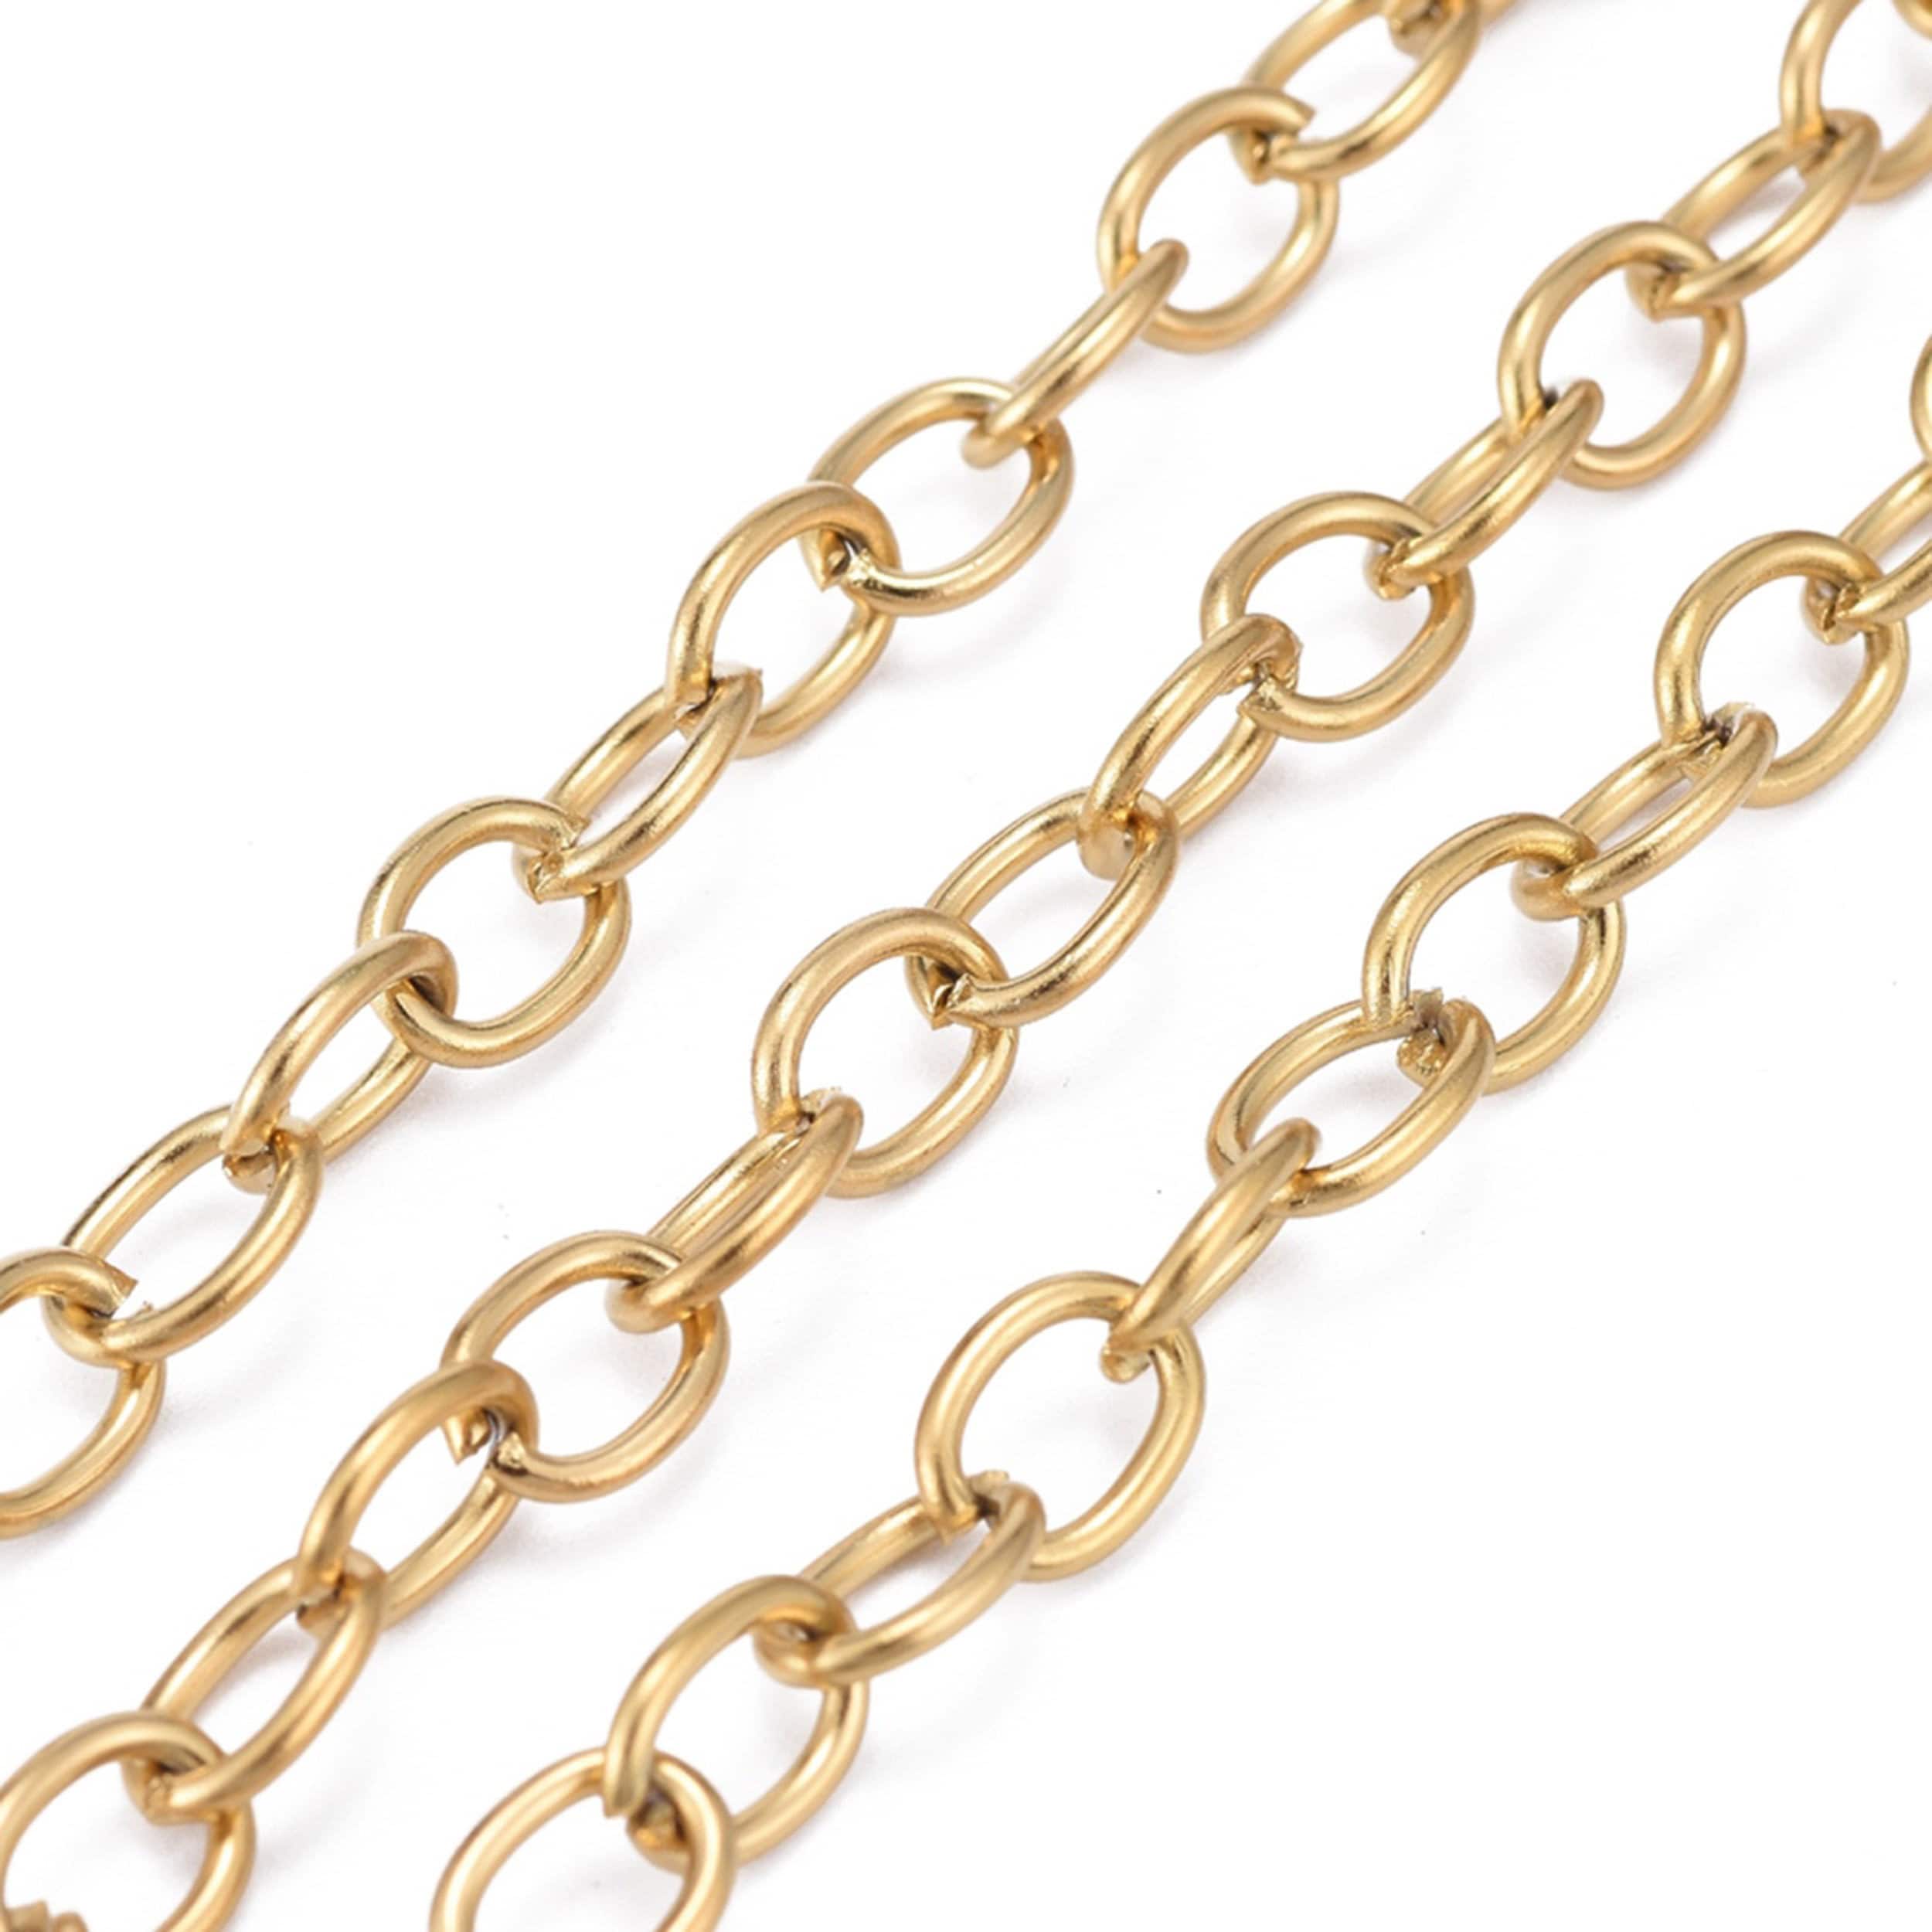 Colorful Fine Stainless Steel Chain, Bulk Jewelry Making Supplies, Fla -  Jewelry Tool Box